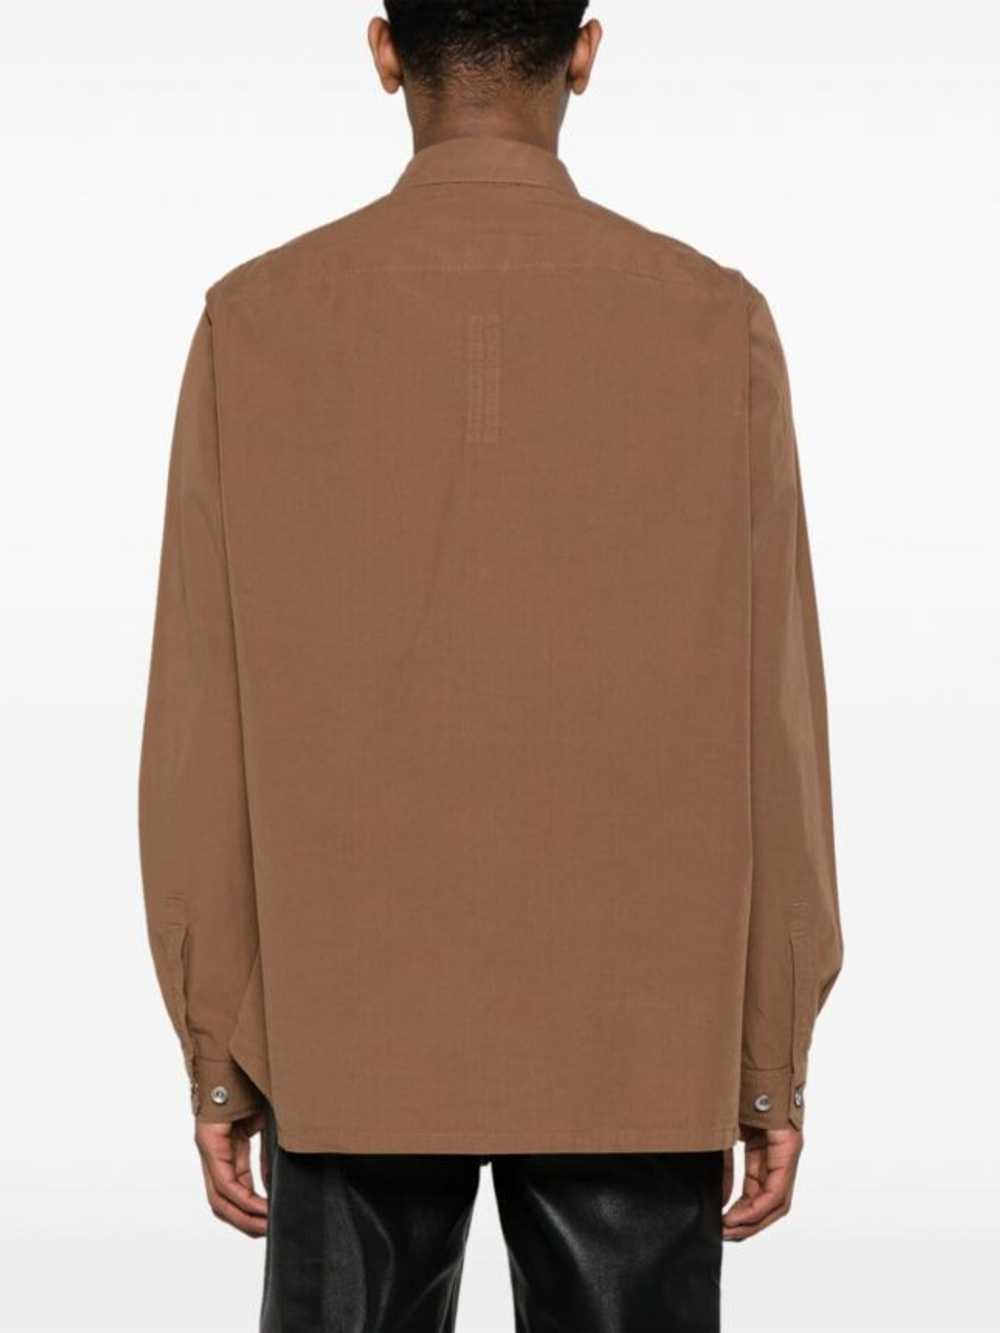 Rick Owens Drkshdw Outershirt - image 4